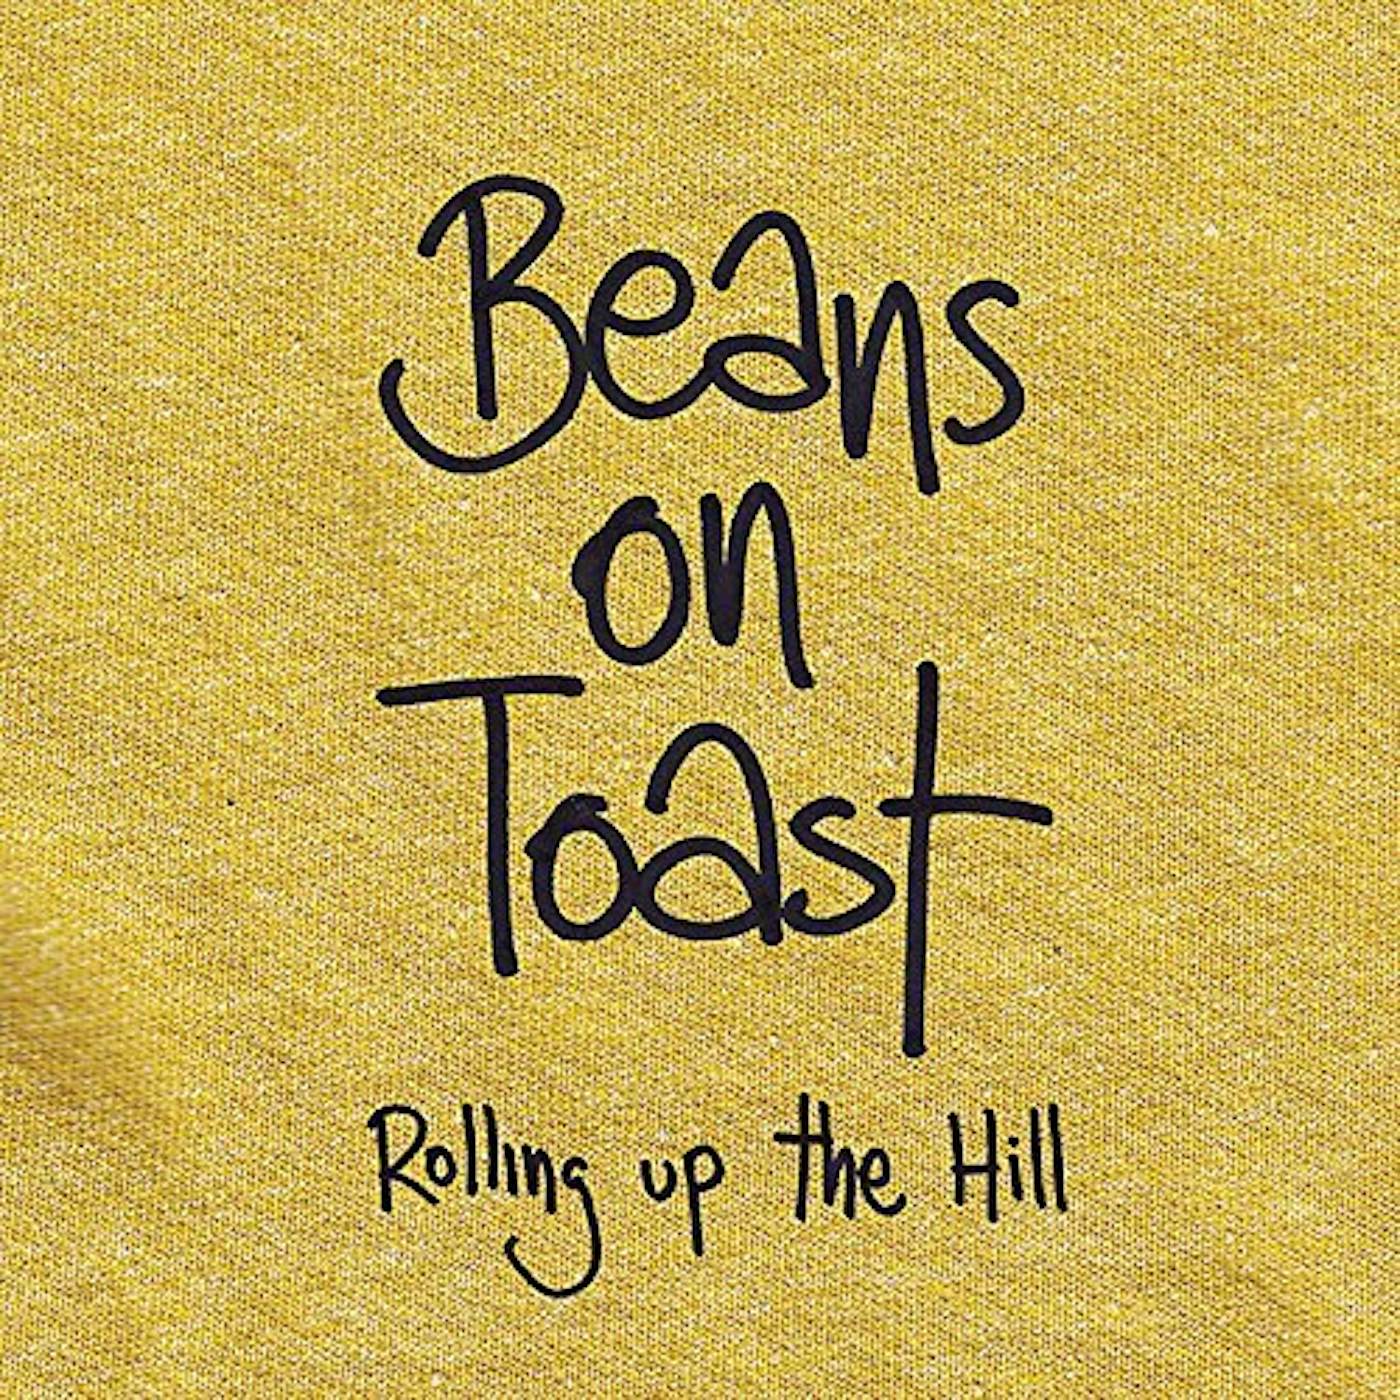 Beans on Toast ROLLING UP THE HILL (EXP) CD